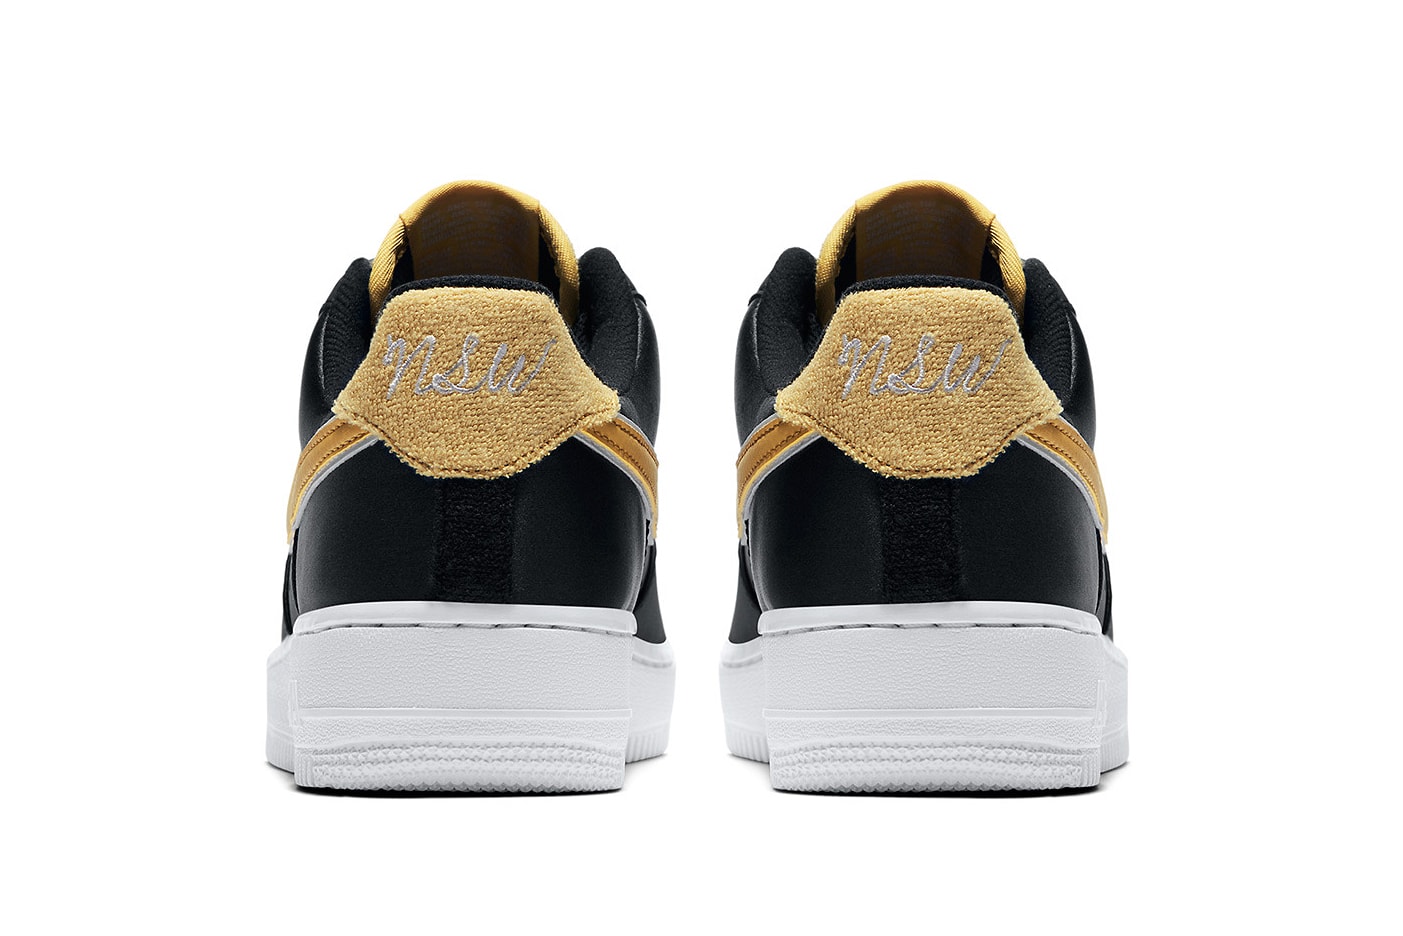 Nike Air Force 1 Low Satin Black and Gold